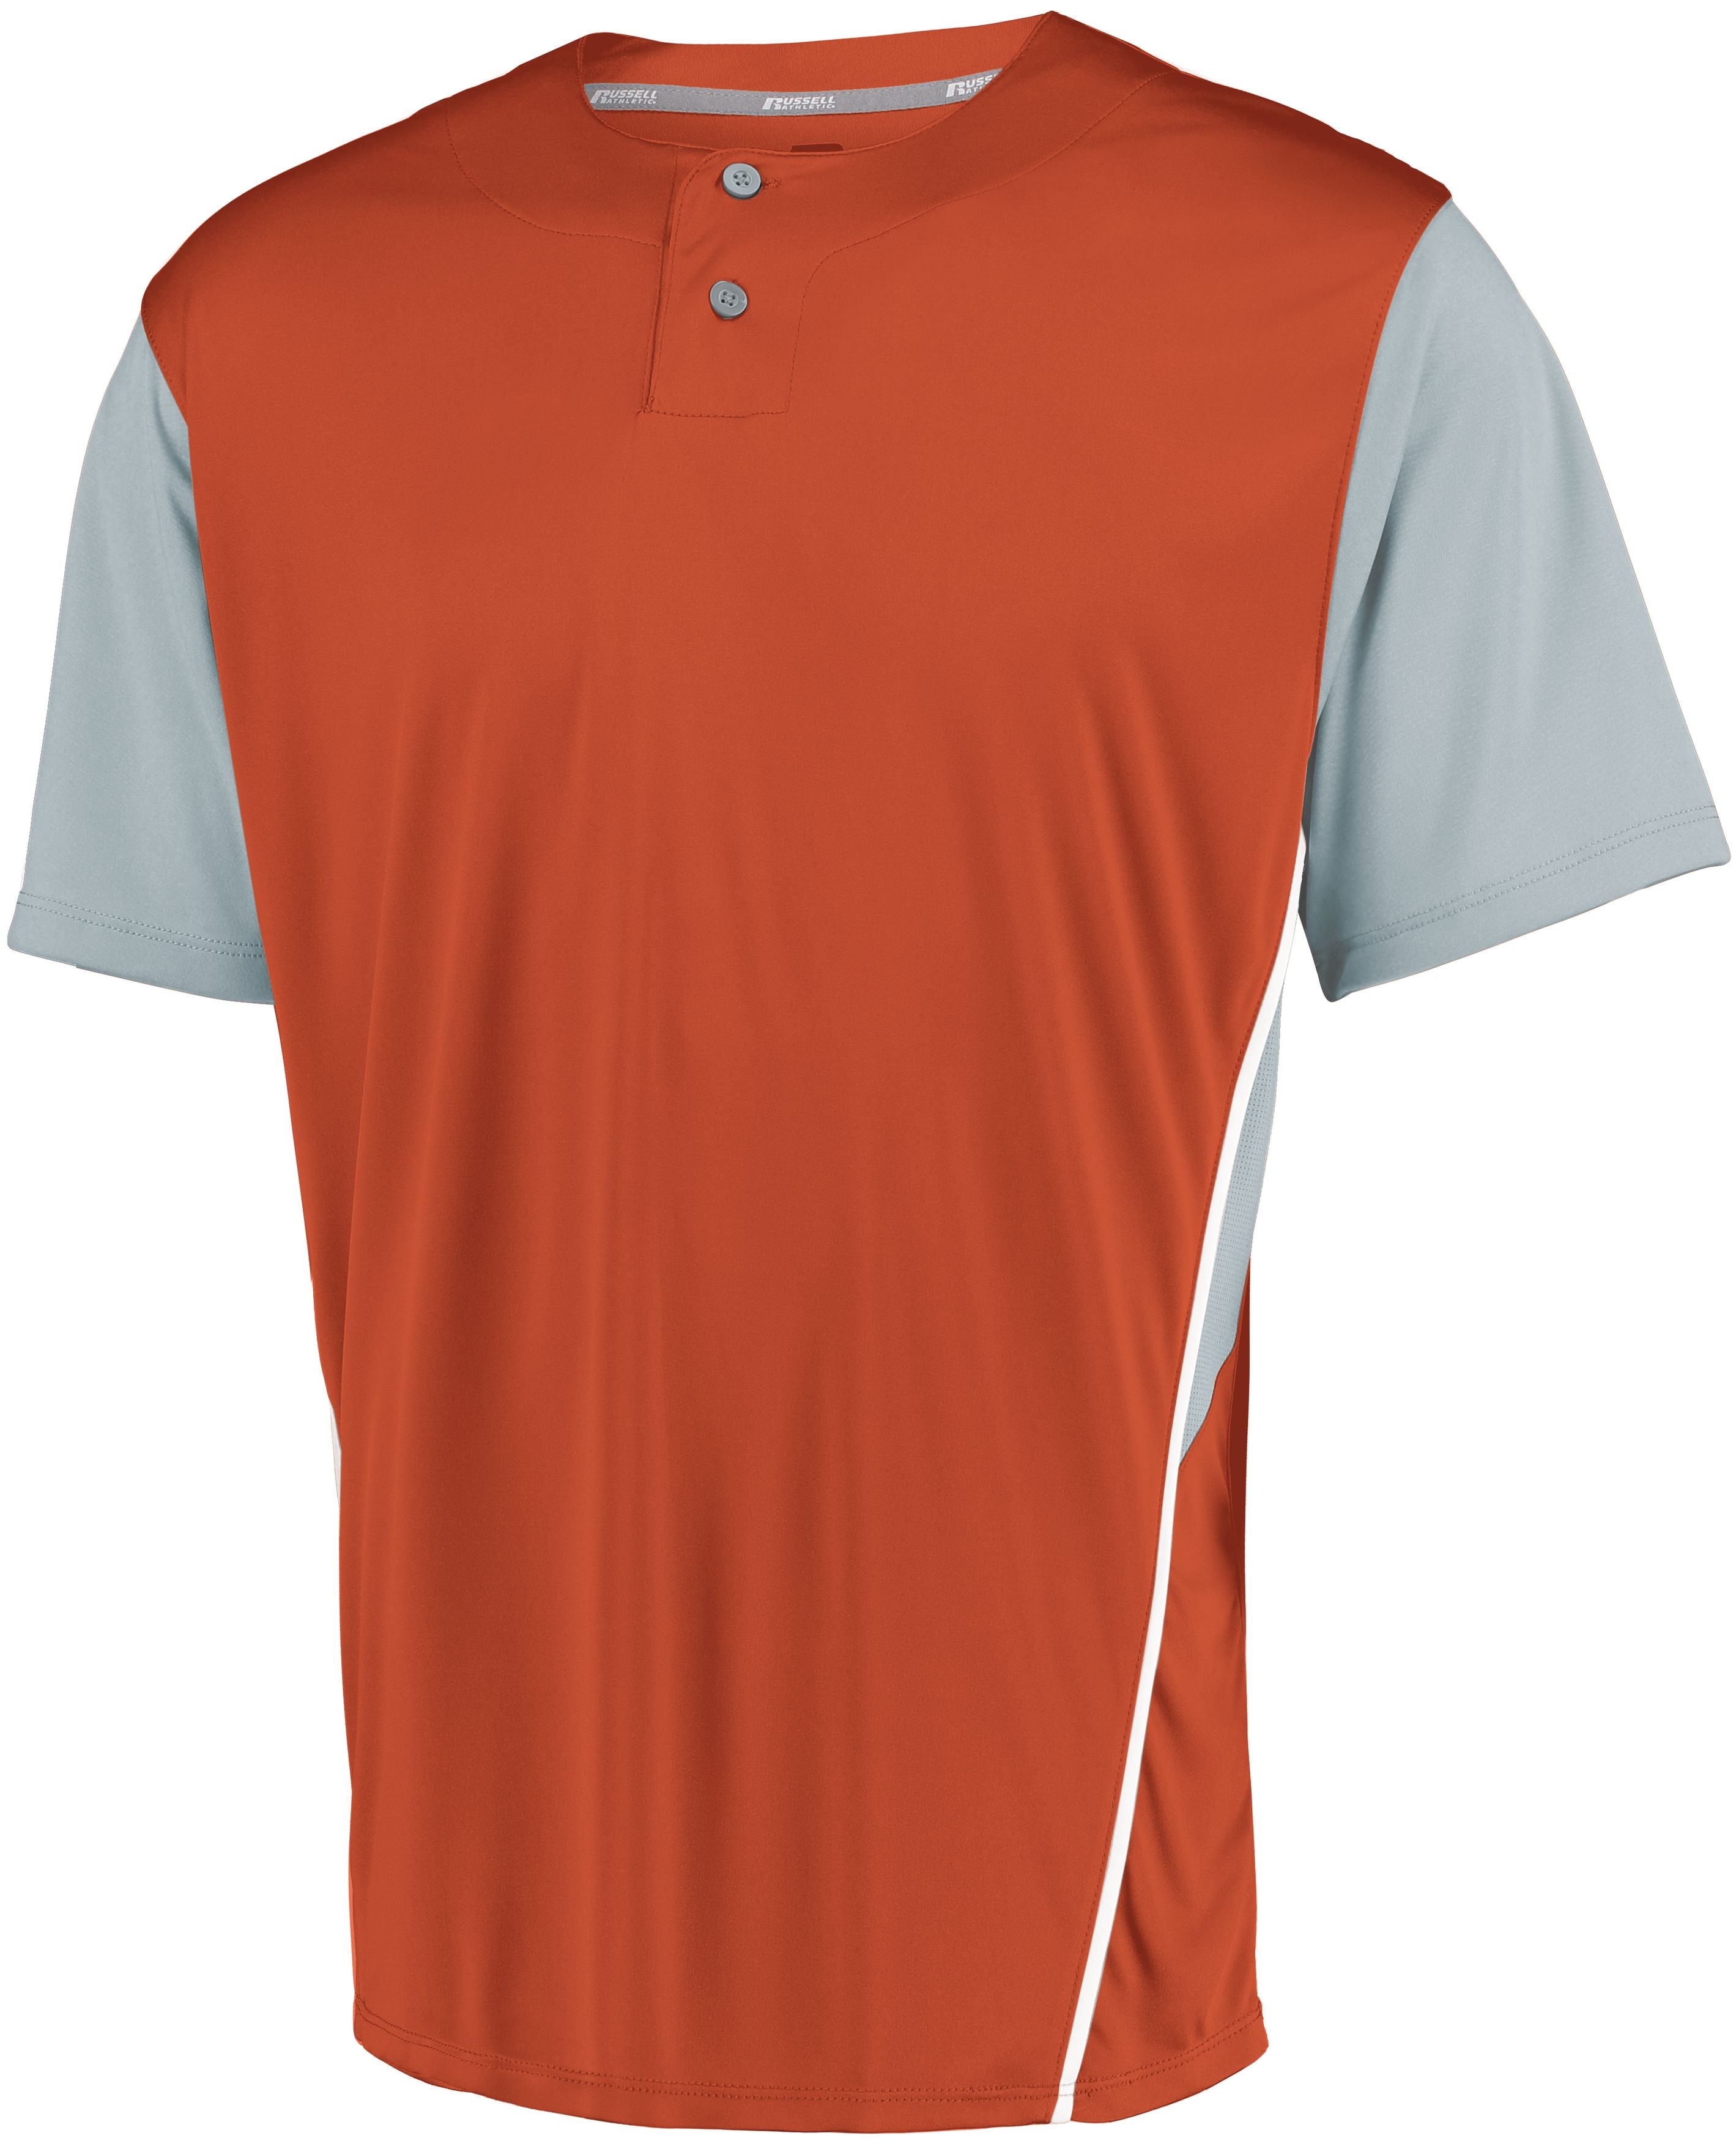 Performance Two-Button Color Block Jersey 3R6X2M